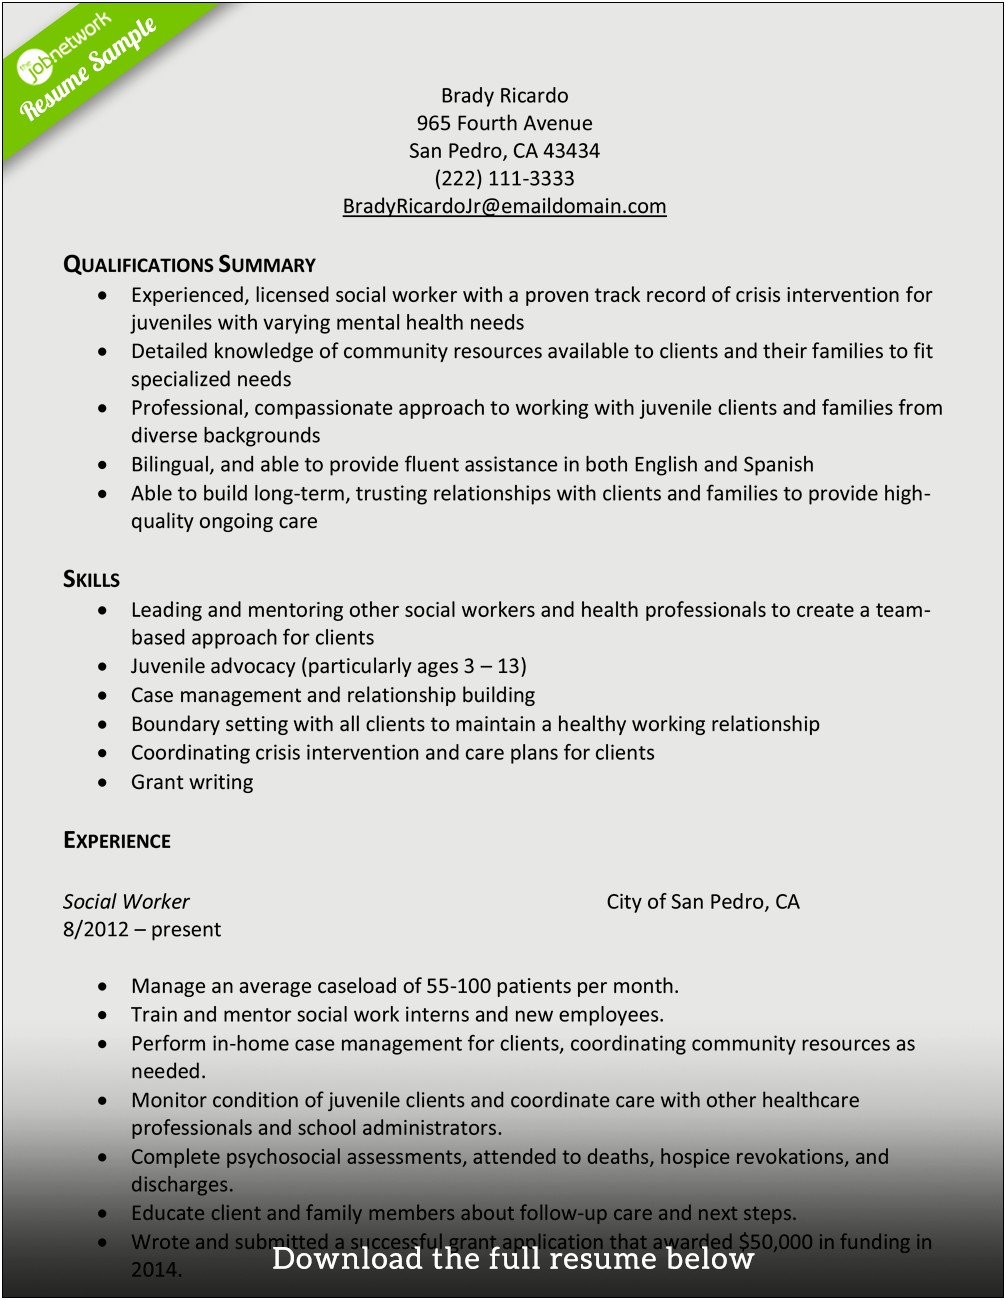 Examples Of Professional Resumes For Social Workers